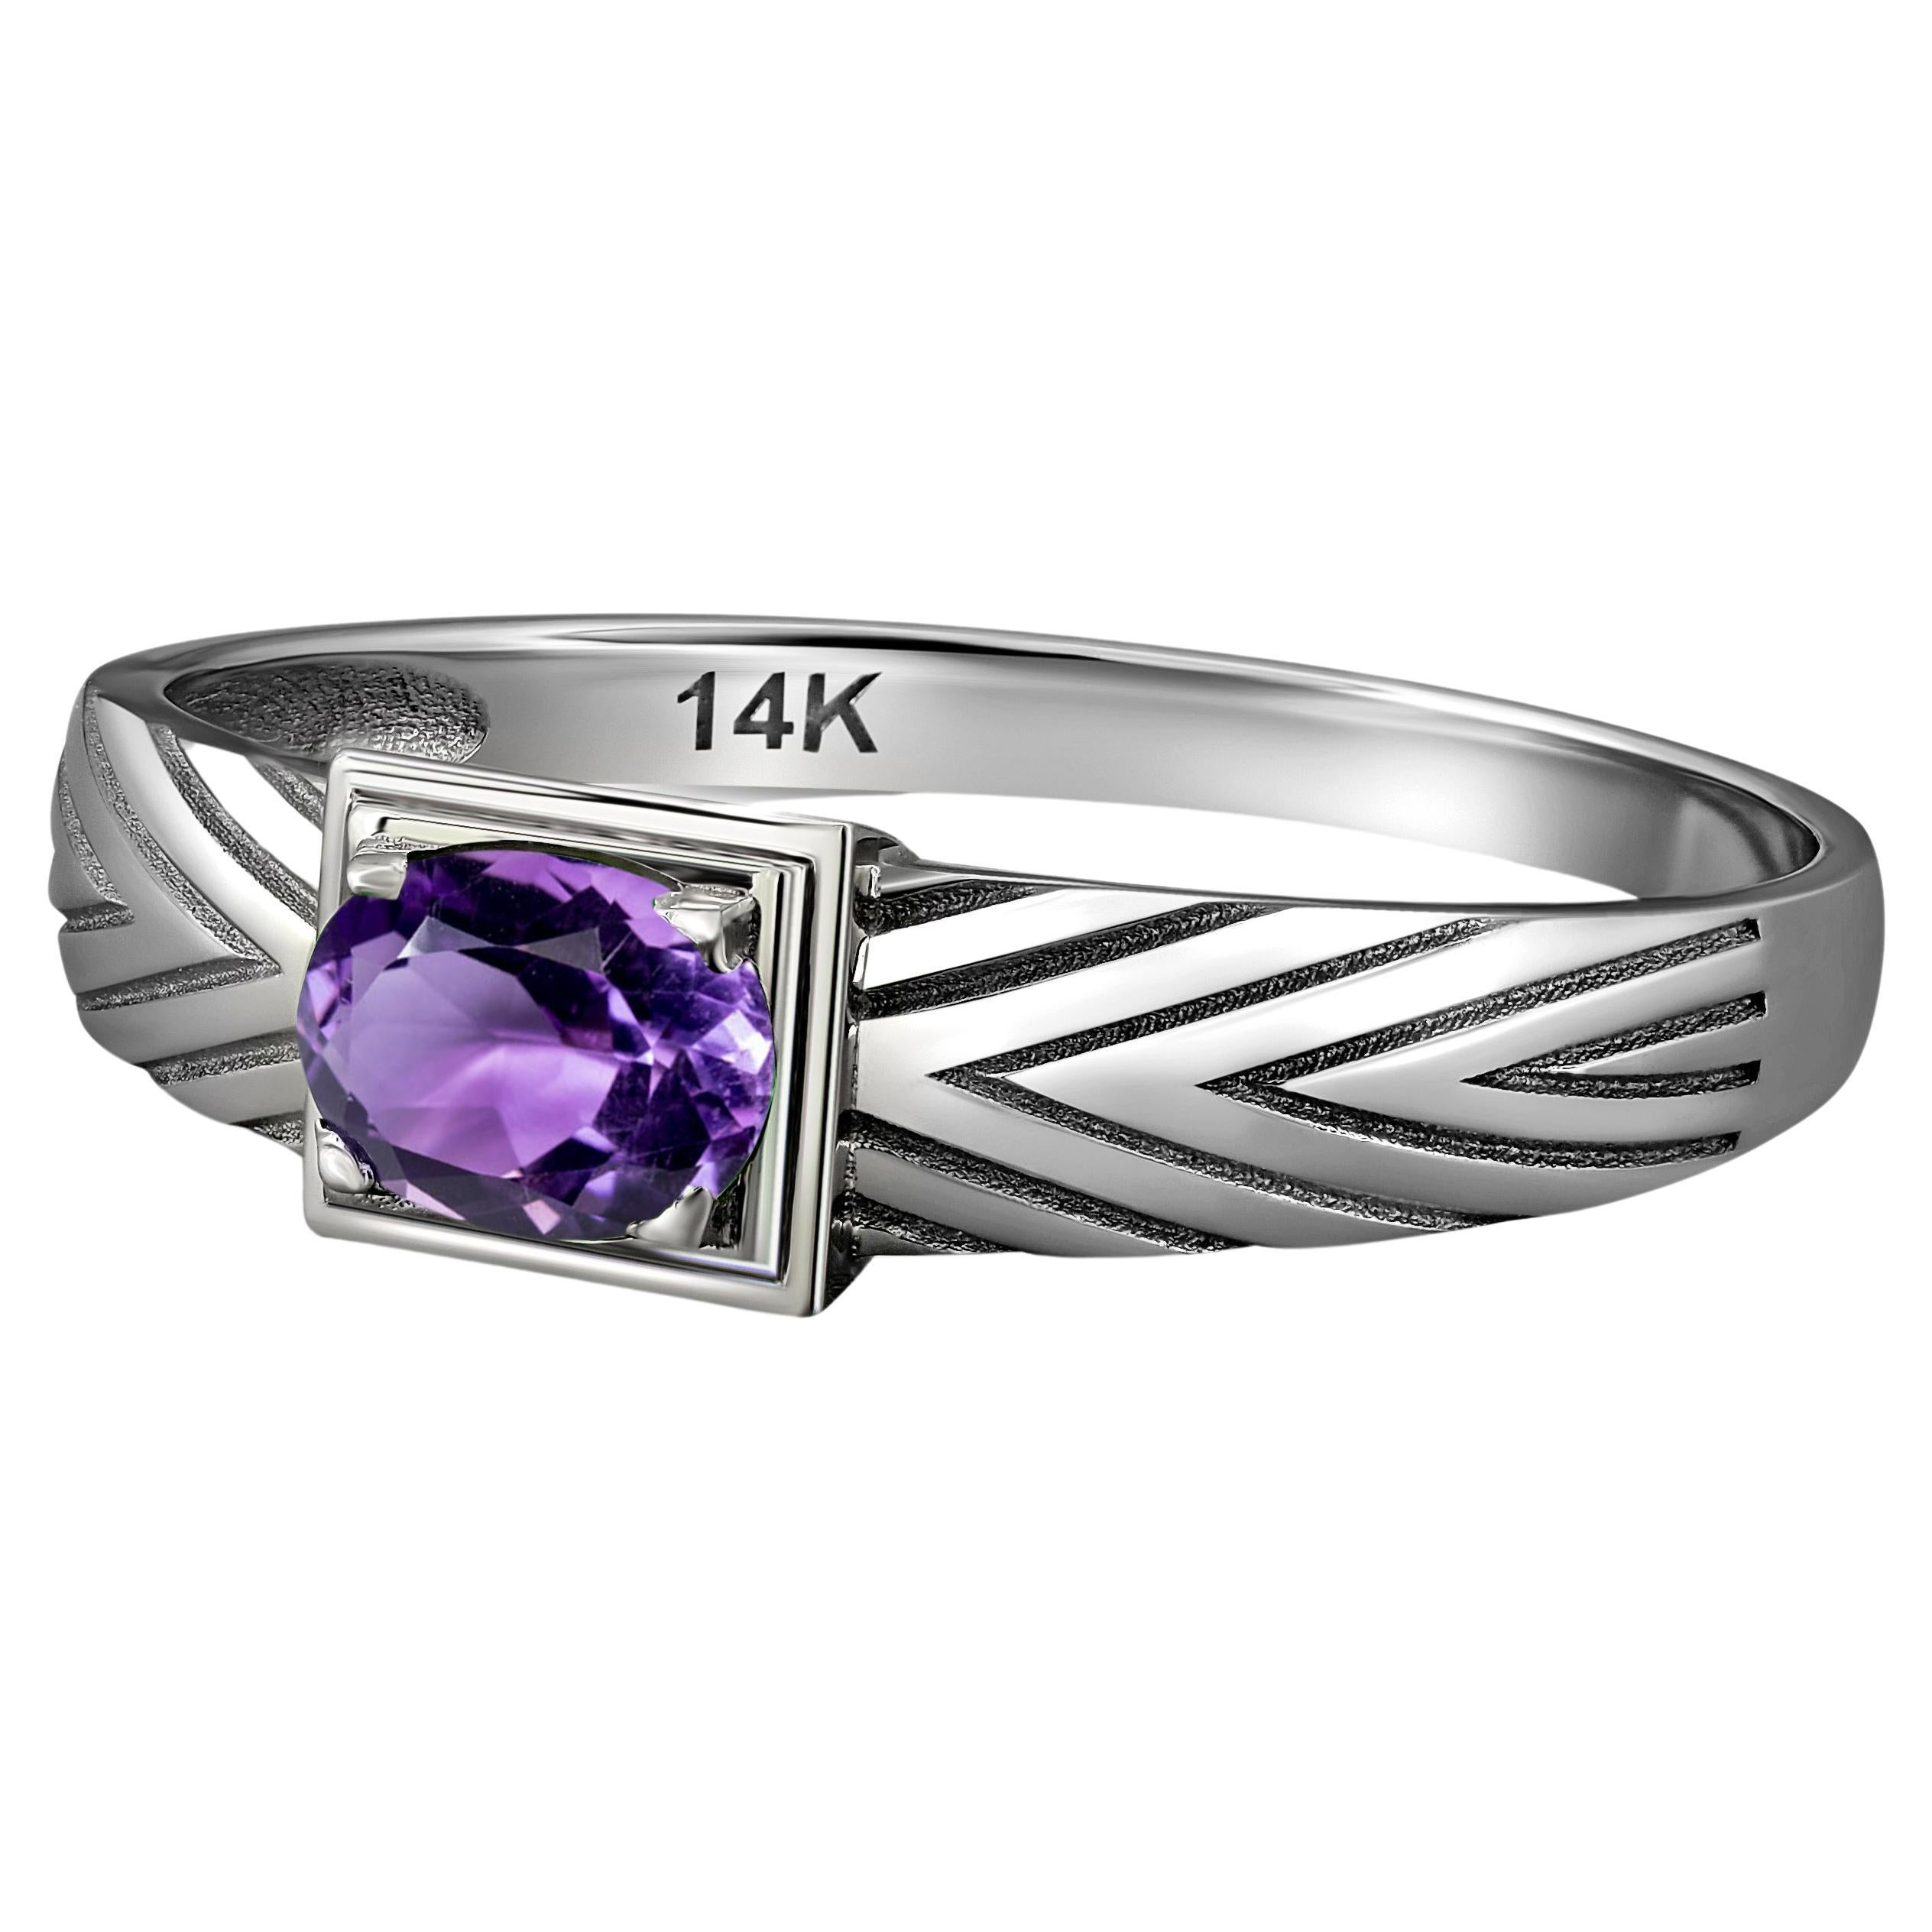 14K Gold Mens Ring with Amethyst. 